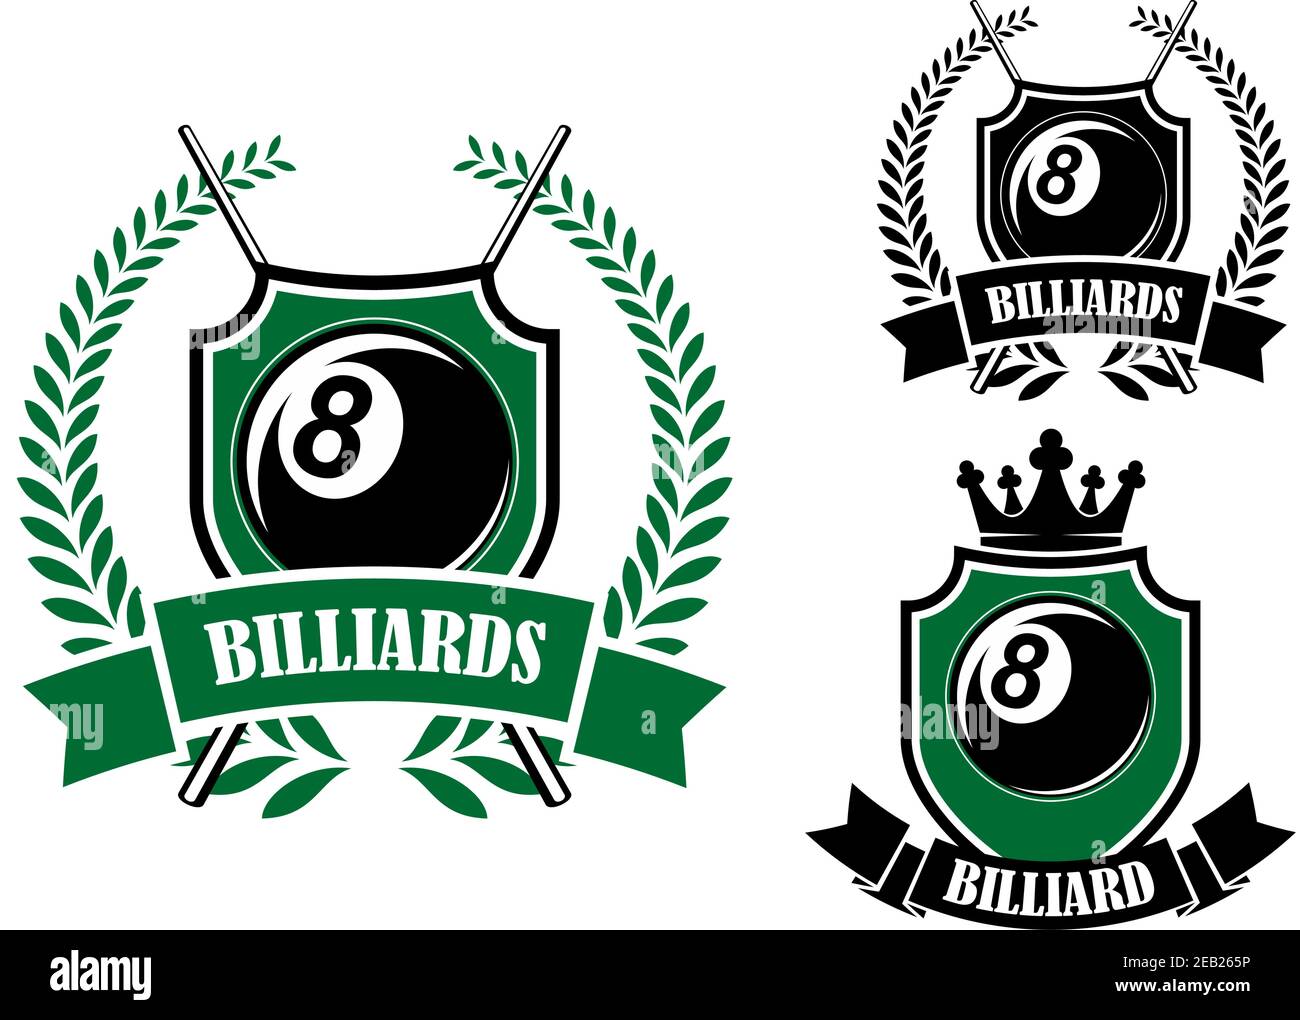 Eight ball billiards or pool emblem with crossed cues, black ball, crown and laurel wreath Stock Vector